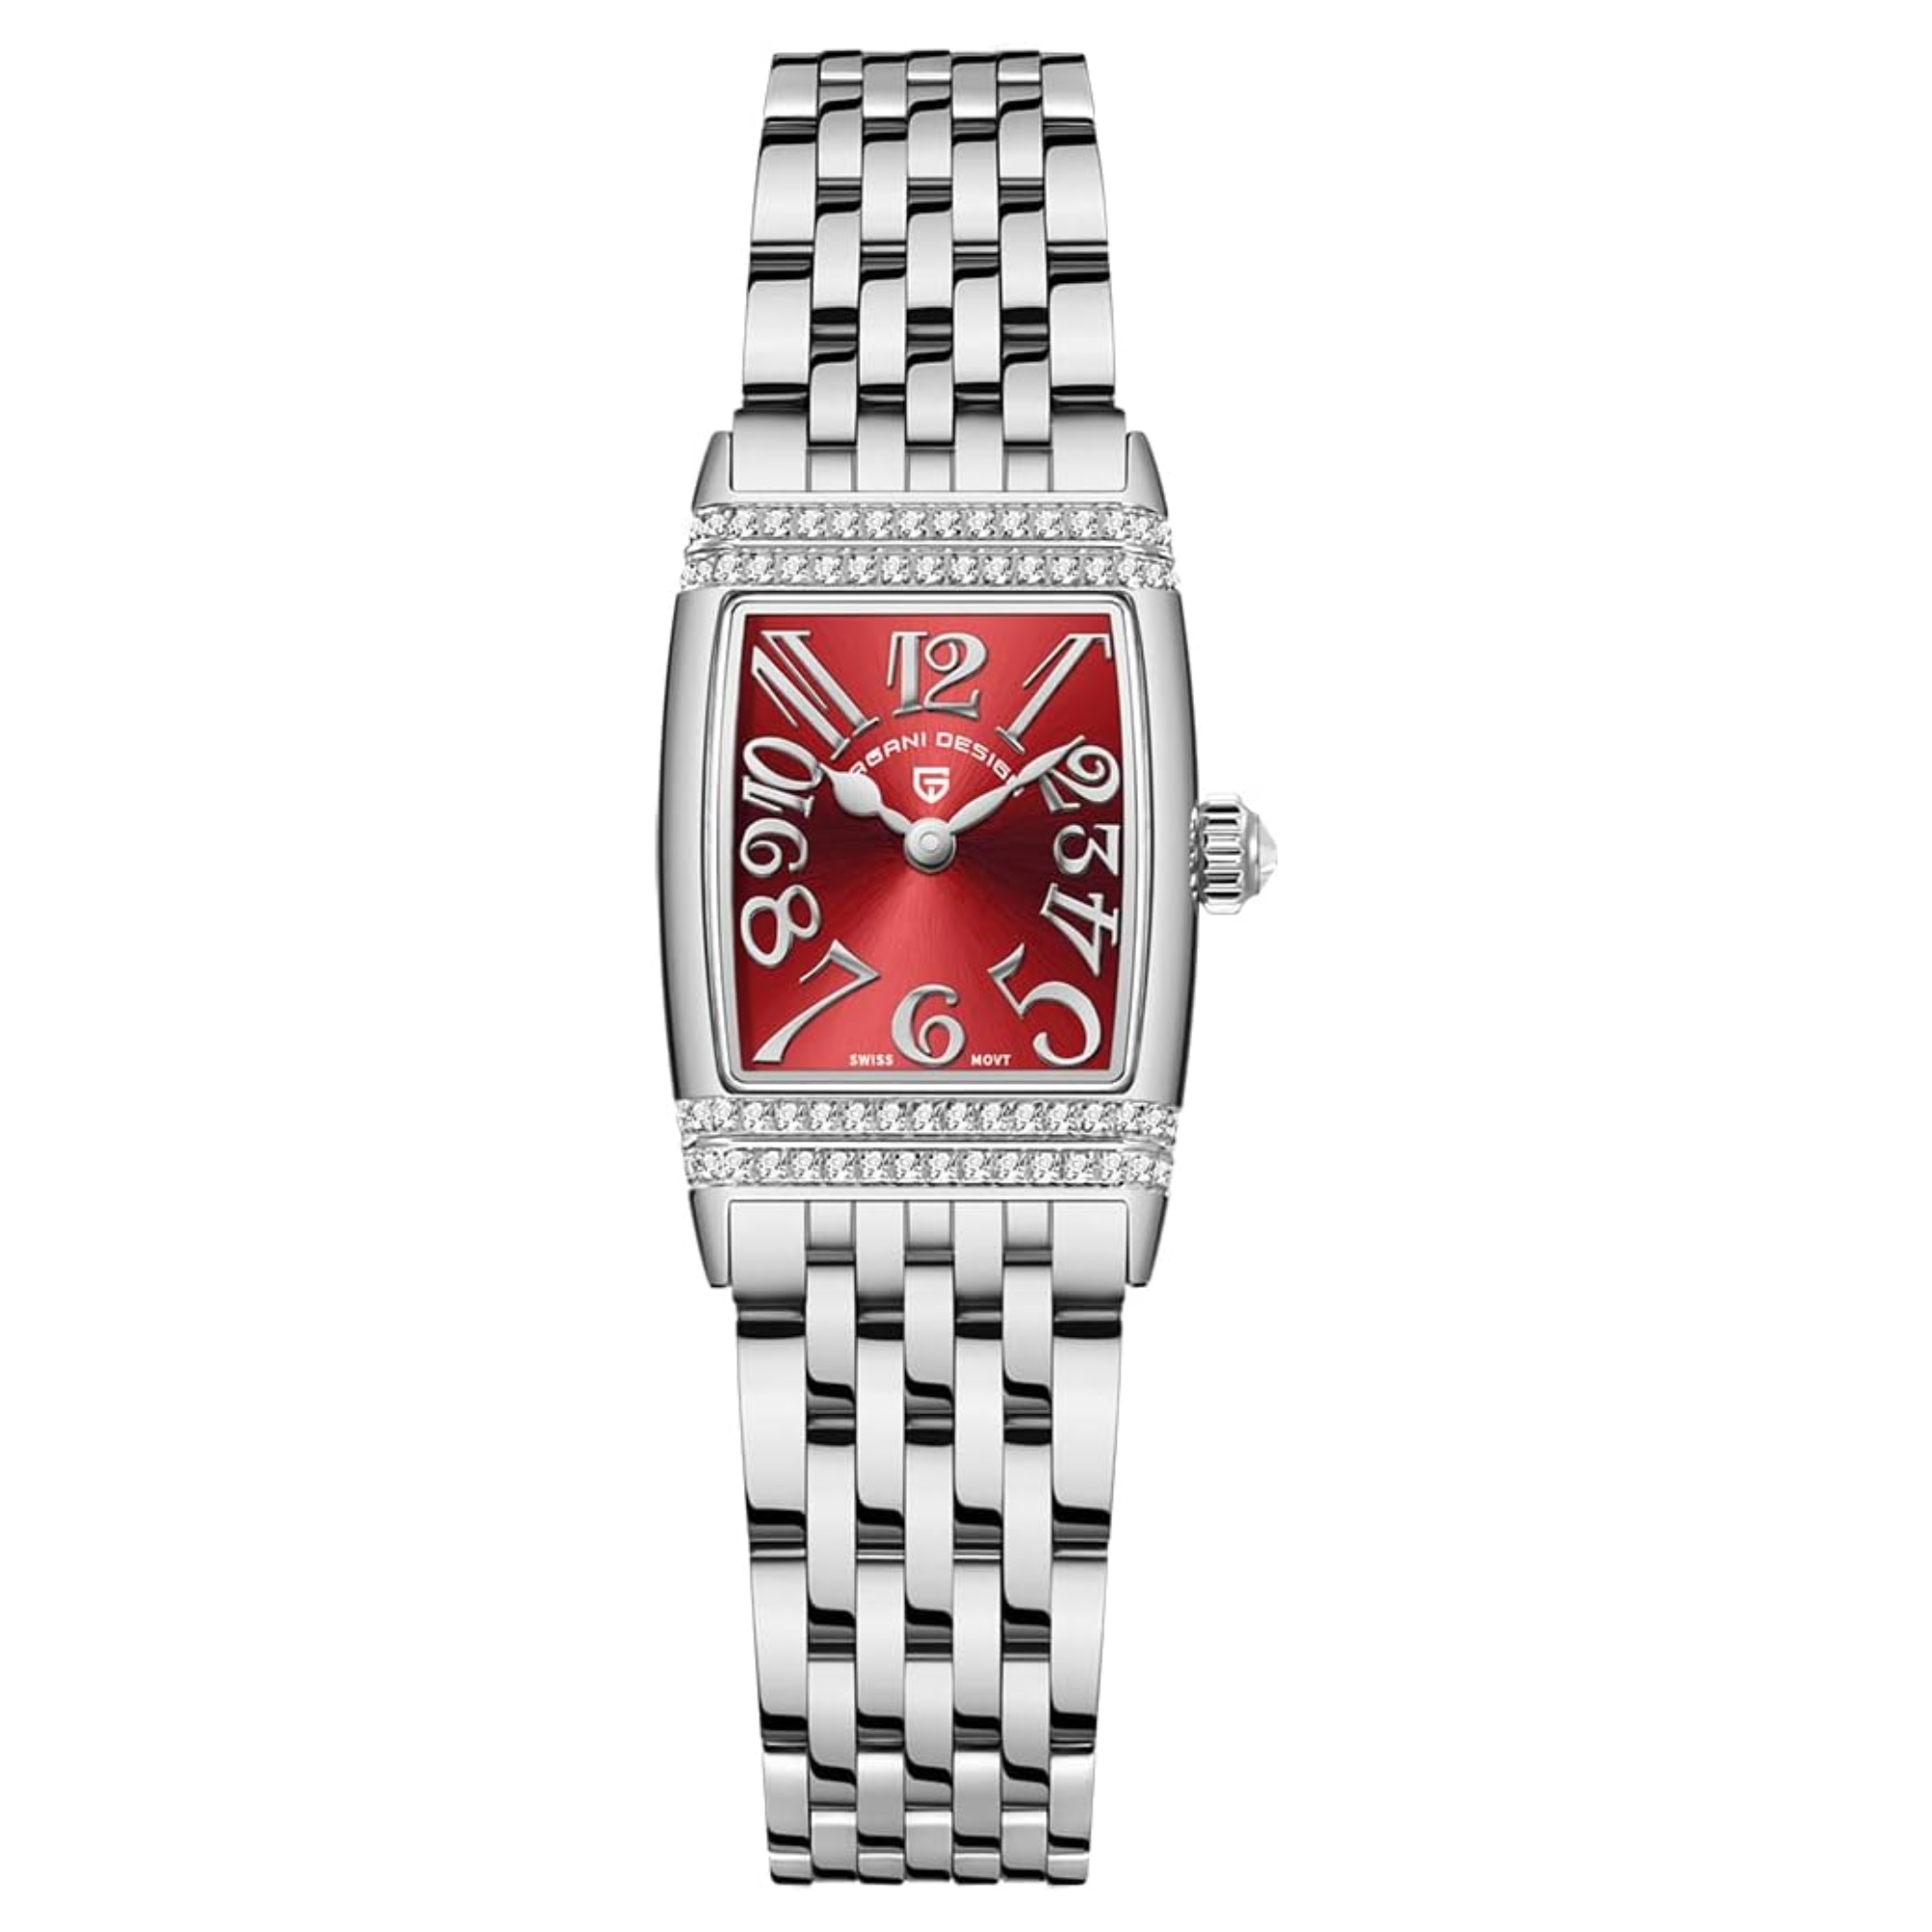 Pagani Design PD-1737 Women's Quartz Watches 22mm with Stone Set Rectangle Case, Analogue Display and Stainless Steel Ladies Watch - Silver Red